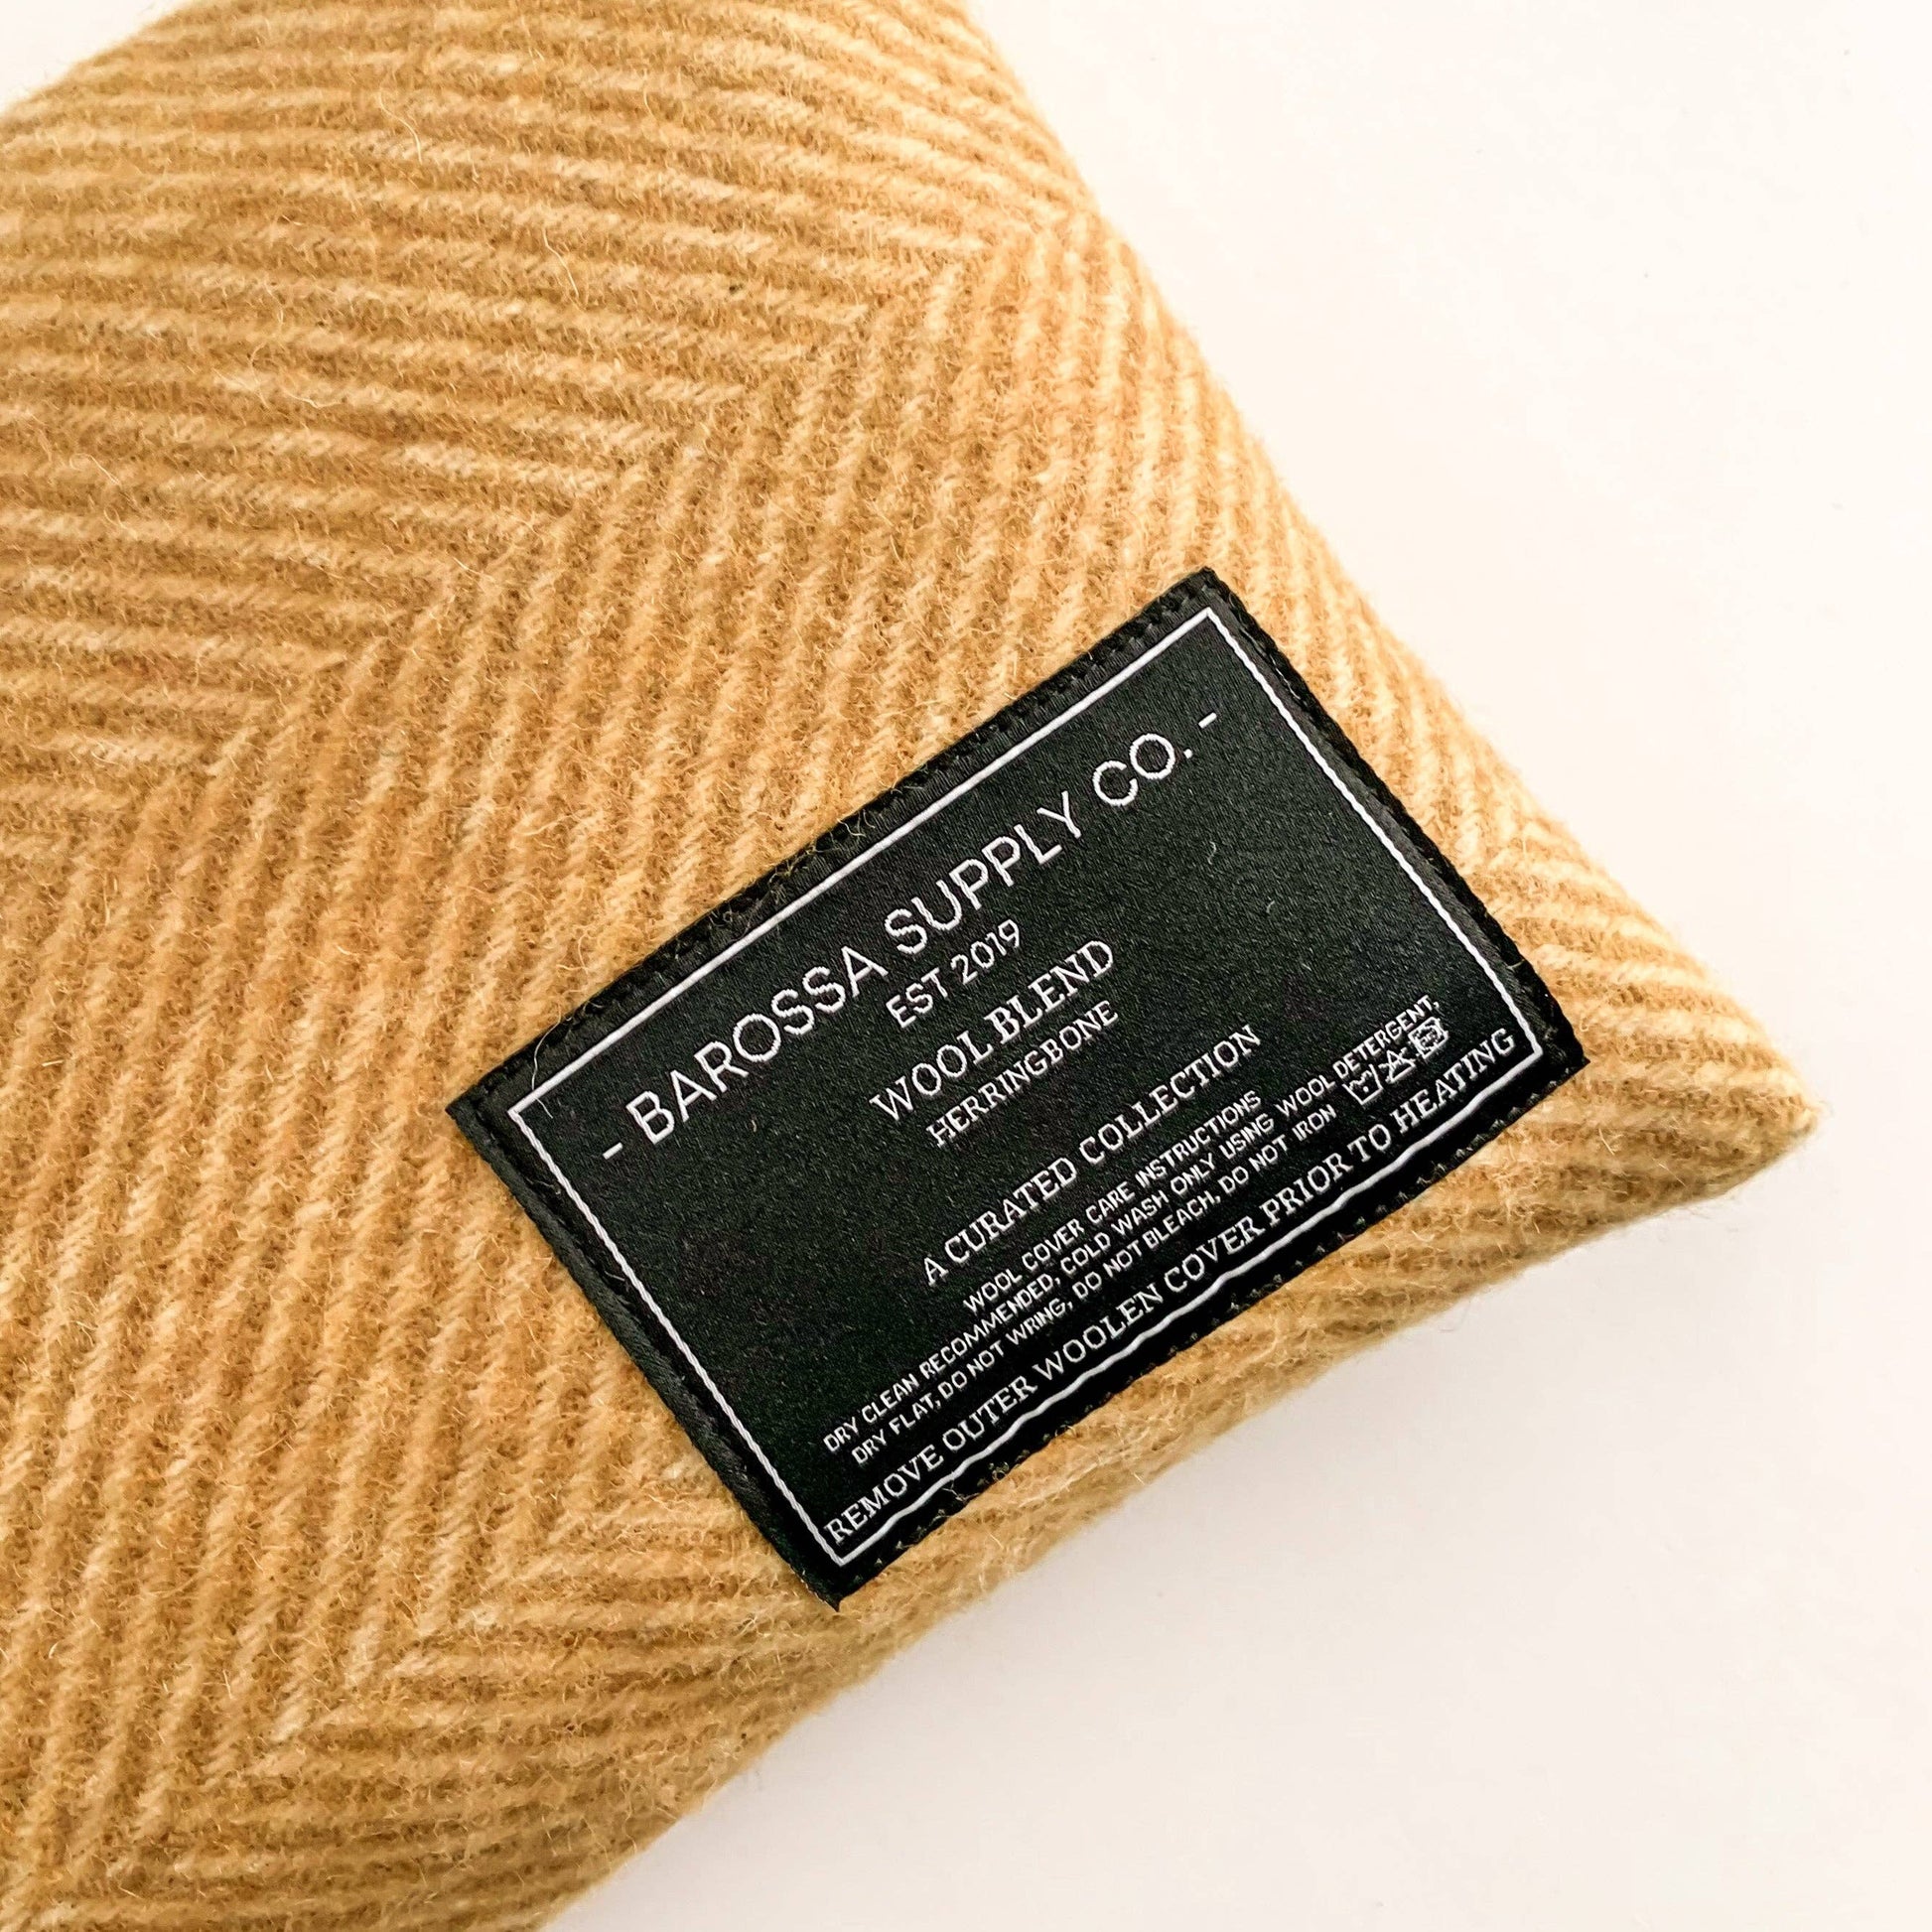 In collaboration with Cotton Apothecary, Barossa Supply Co is pleased to offer our range of herringbone wool blend heat packs. Perfect for providing comfort and warmth, these heat packs are both functional and aesthetically pleasing. They can be used both warm and cold and may provide relief from aches and pains. The timeless appeal of these herringbone heat packs will compliment many decor styles and they are a beautiful addition to your home when they are on display for everyday use.